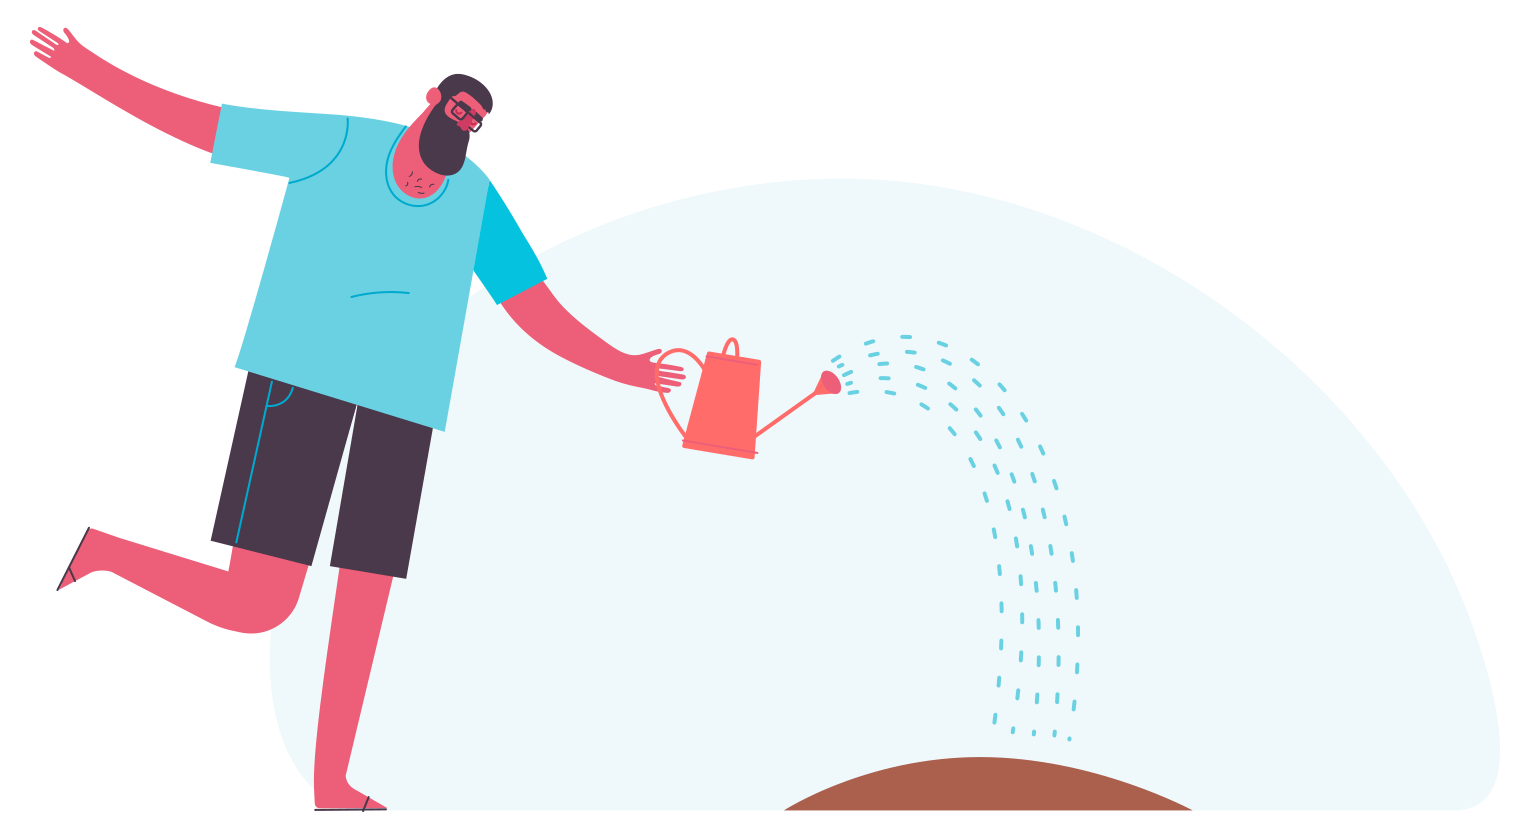 Illustration of a person using a watering can to water the seeds they just planted